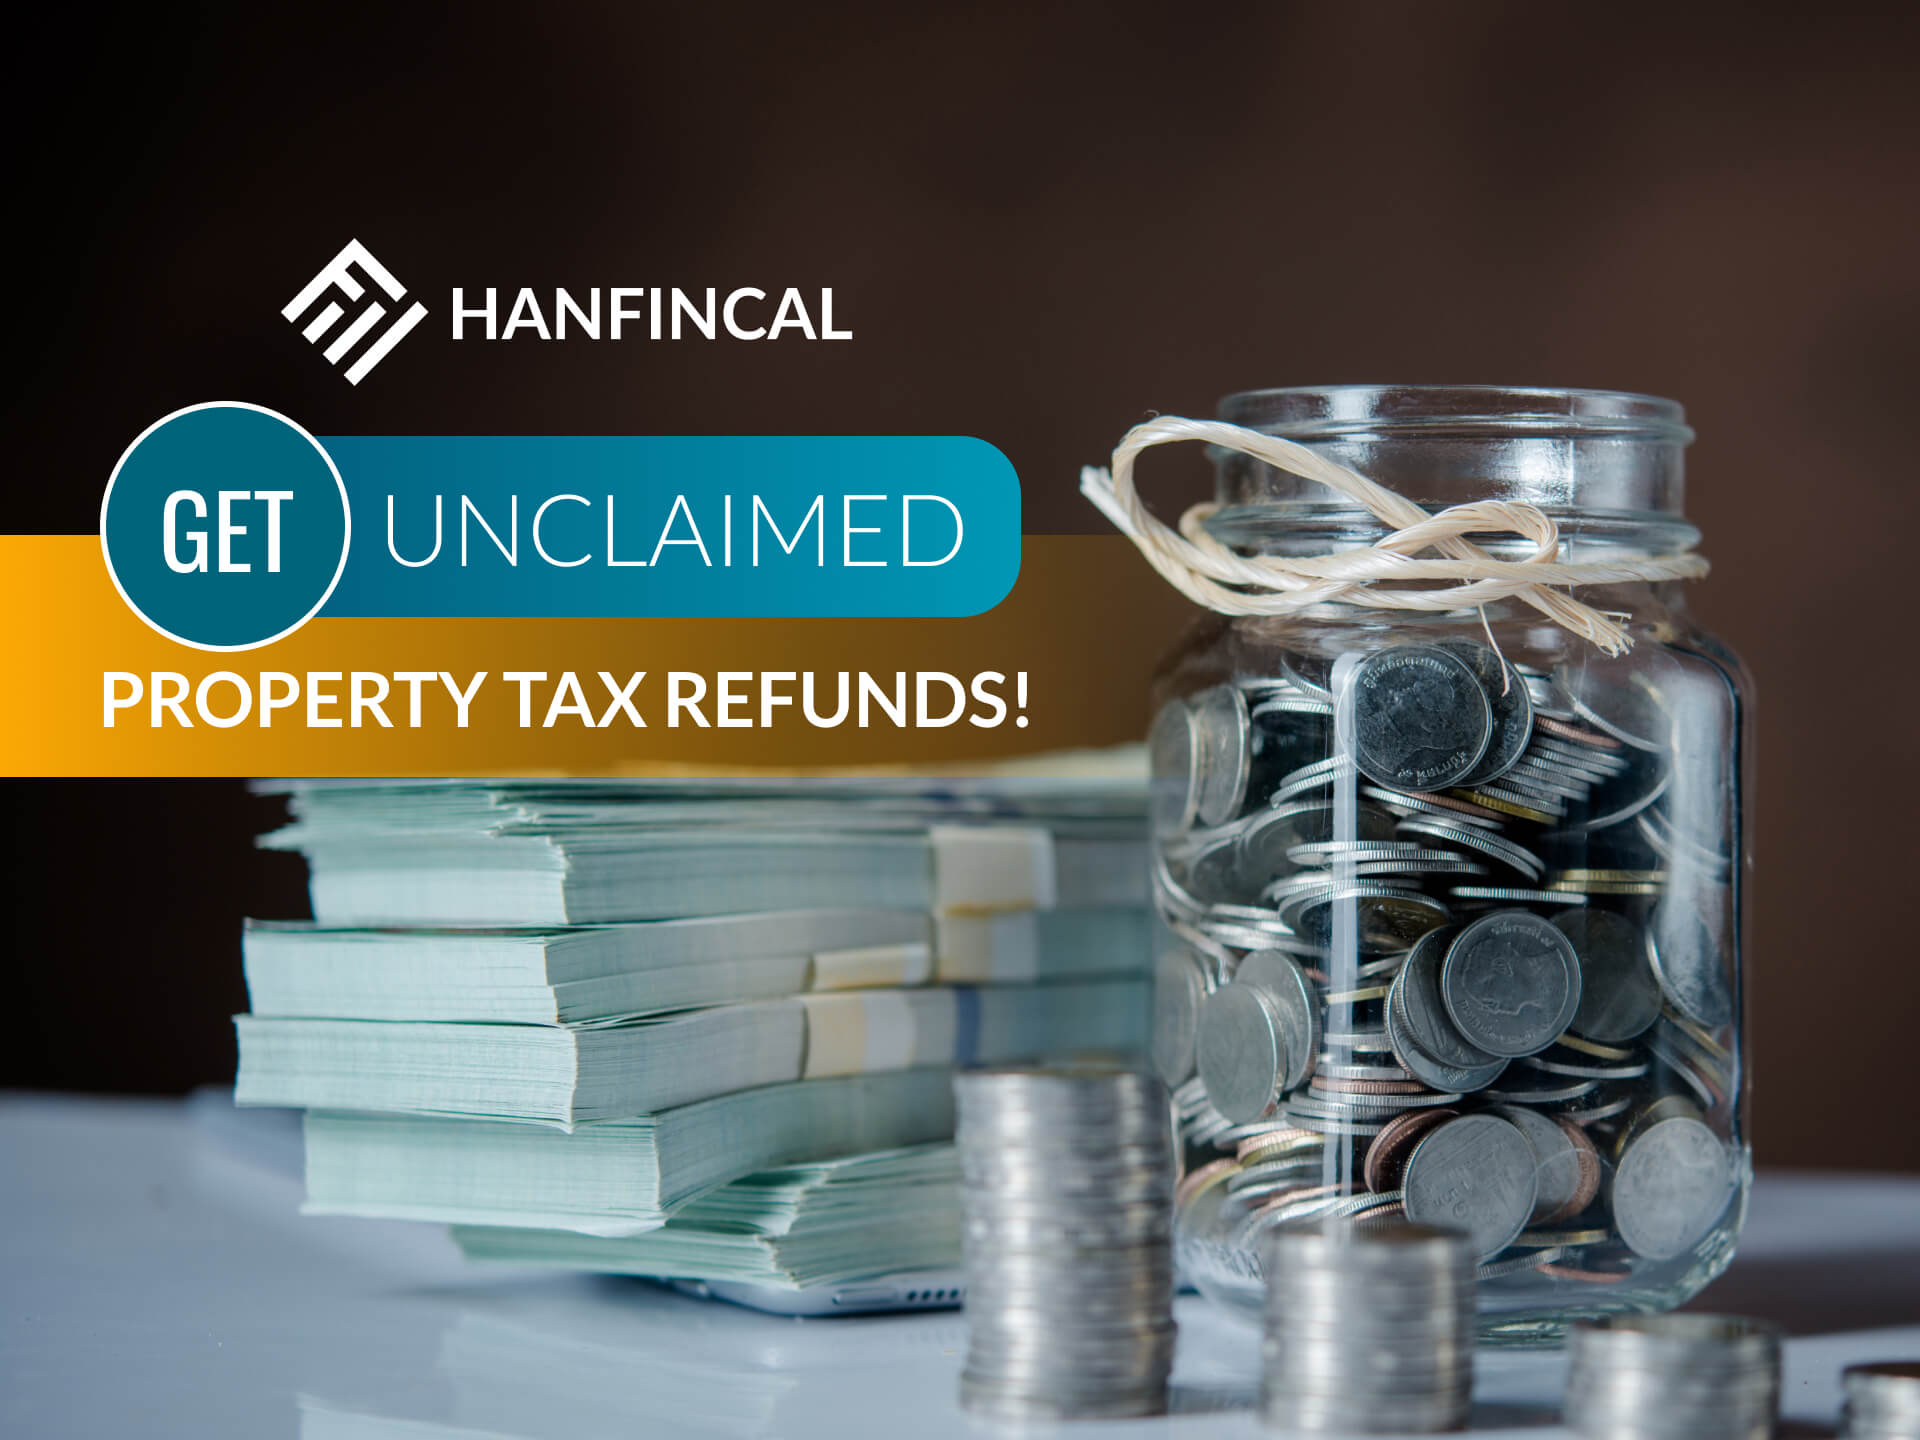 Unclaimed Property Tax Refunds – Get Your Unclaimed Tax